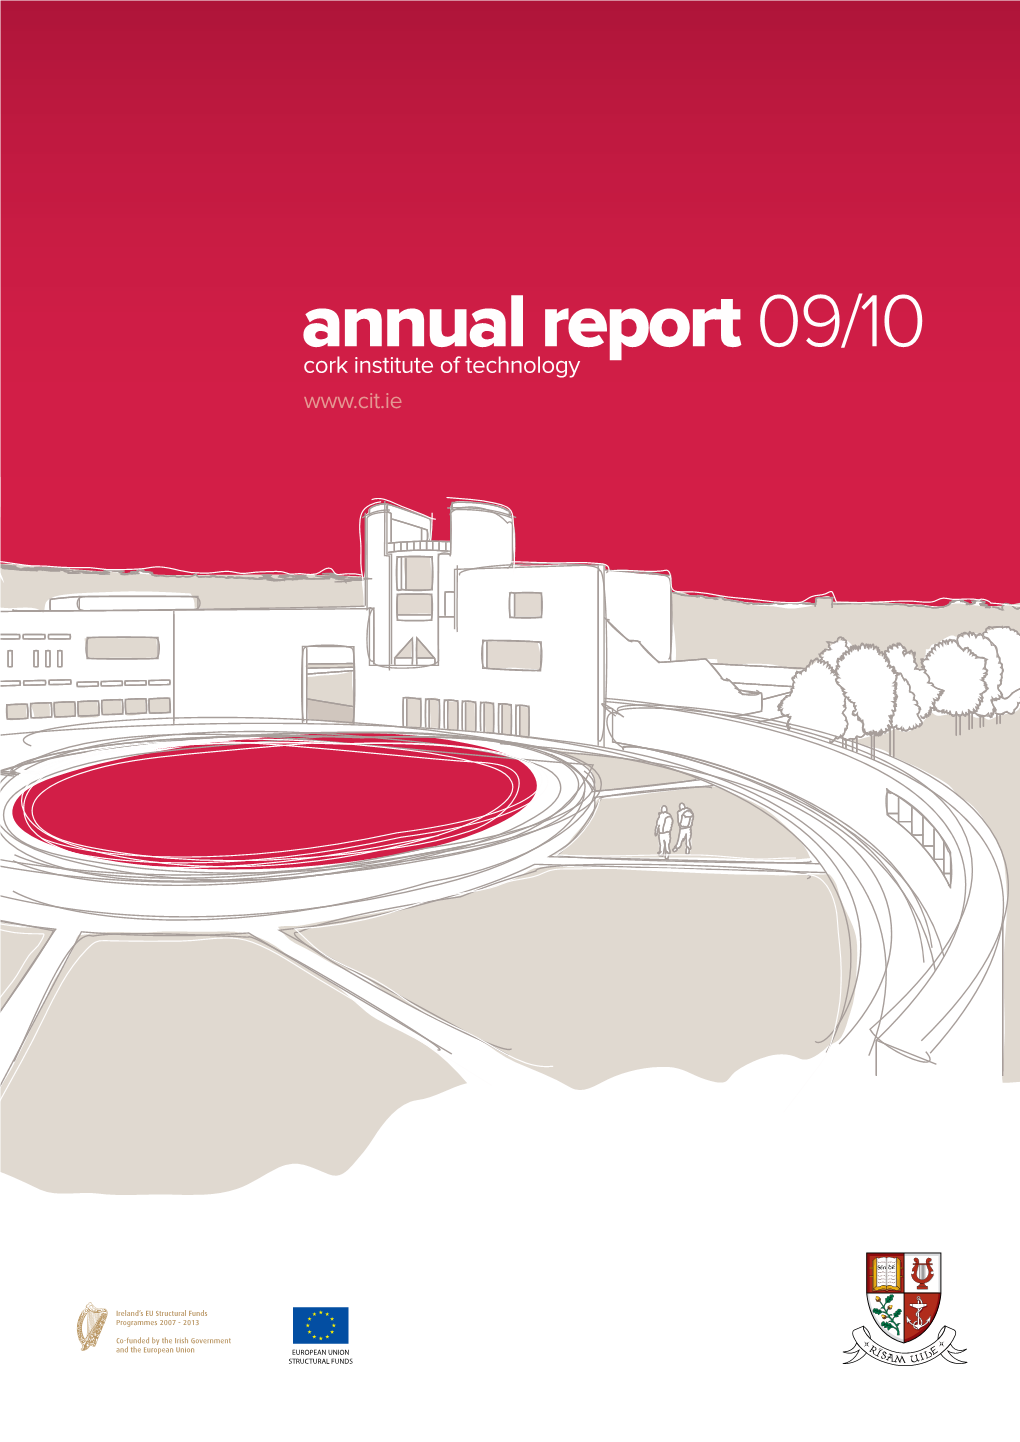 Annual Report 09/10 Cork Institute of Technology 2